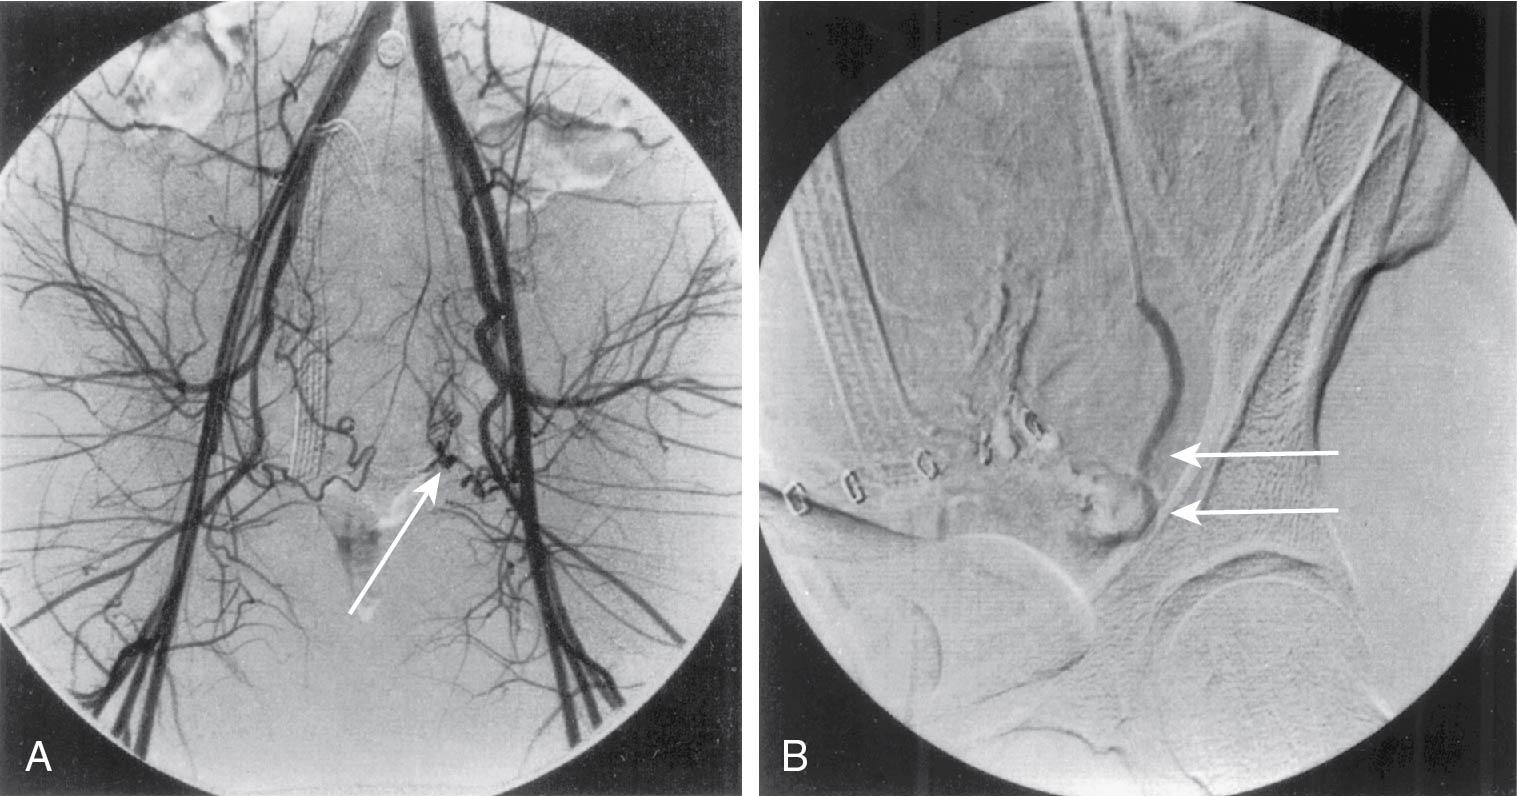 Fig. 25.4, A, Anteroposterior digital subtraction pelvic angiogram in 37-year-old woman with persistent pelvic bleeding after surgical myomectomy for uterine leiomyomas demonstrates contrast pooling ( arrows ) from branches of left uterine artery, consistent with active hemorrhage. B, Postembolization left uterine arteriogram shows occluded left uterine artery (long arrows) with no evidence of active bleeding.